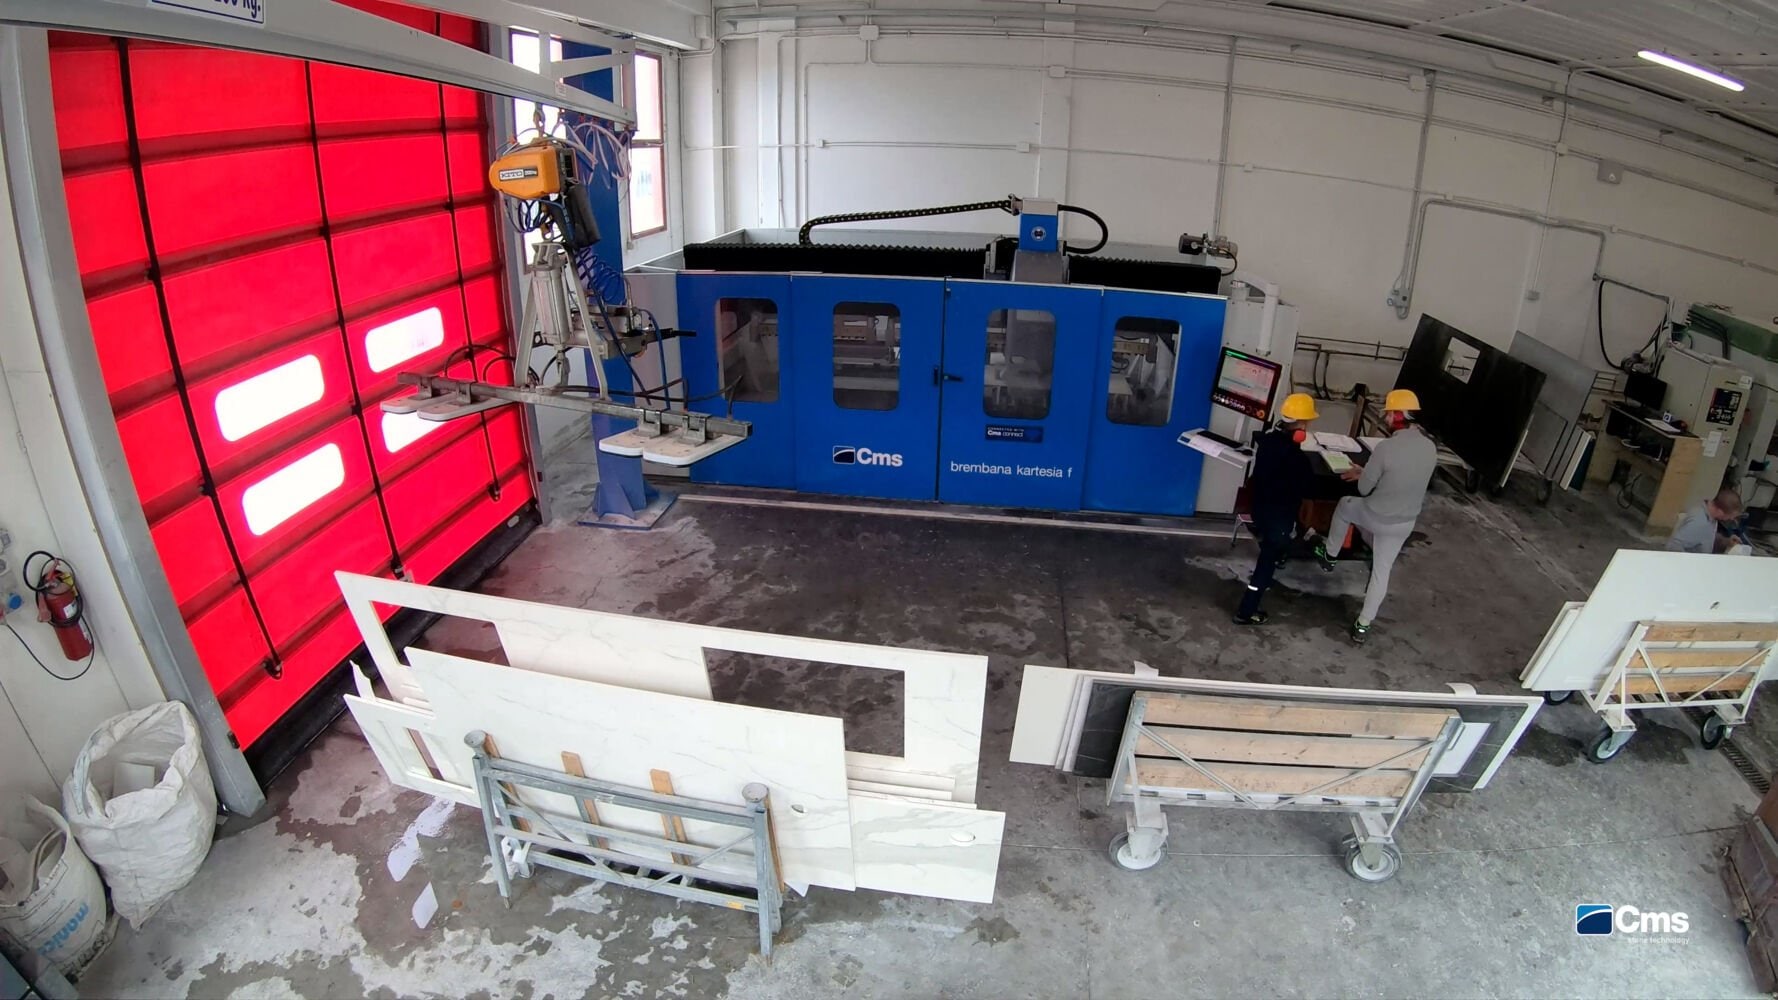 Here are the 5 reasons to choose brembana kartesia for your fabrication needs! 